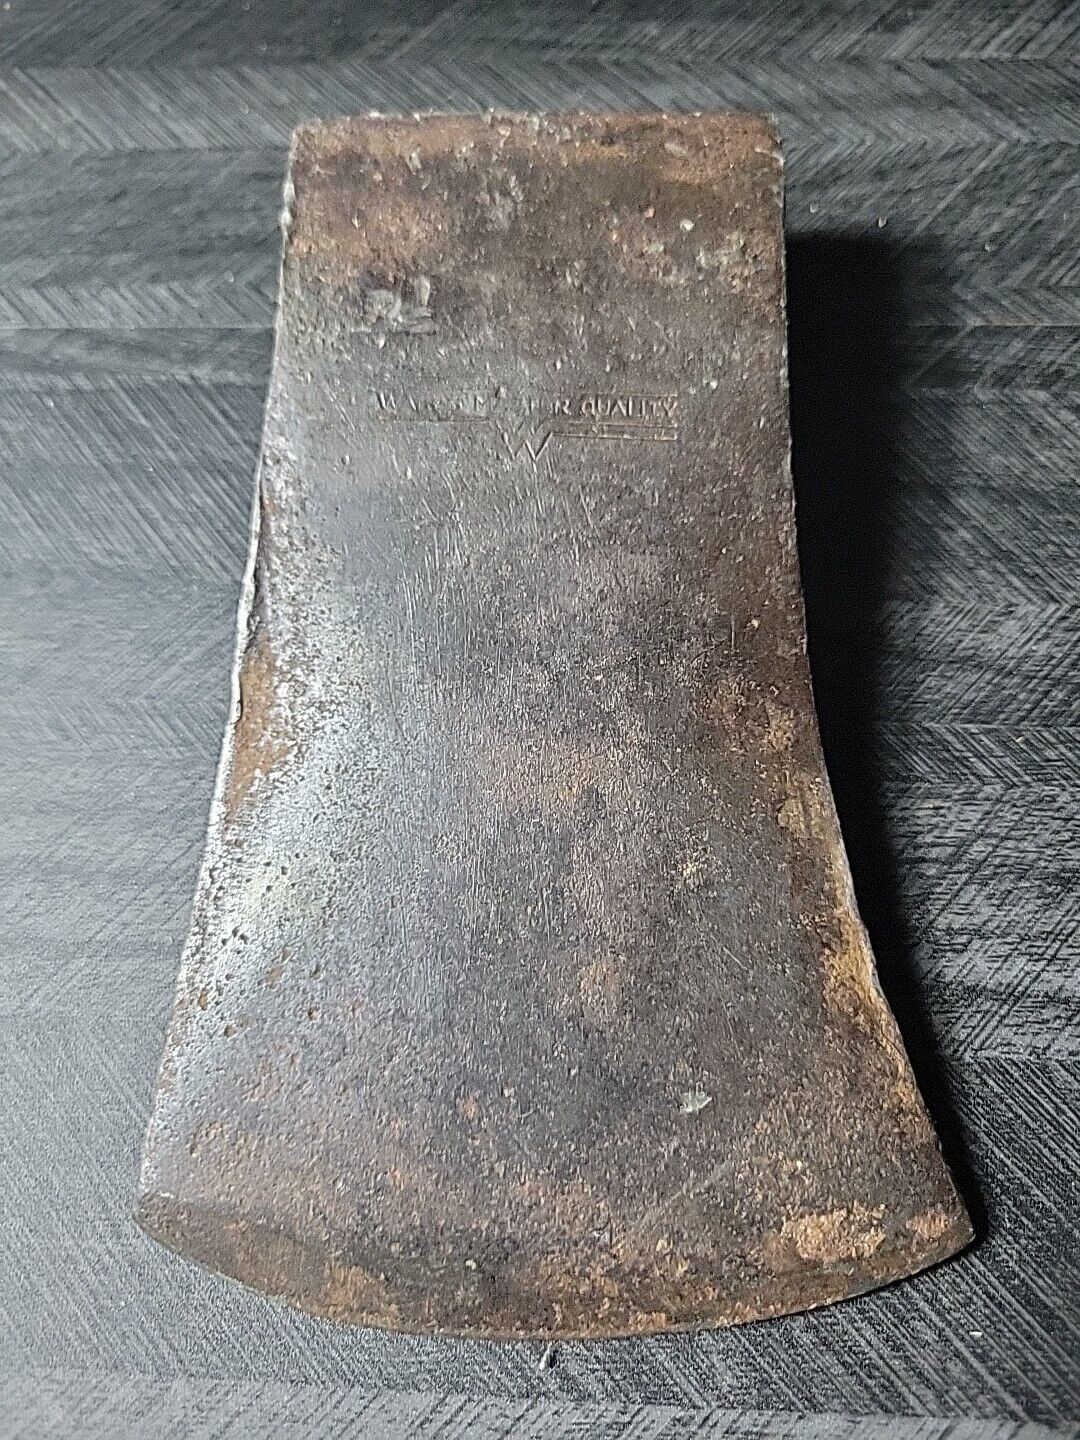 Vintage Embossed WARDS MASTER QUALITY Axe Head